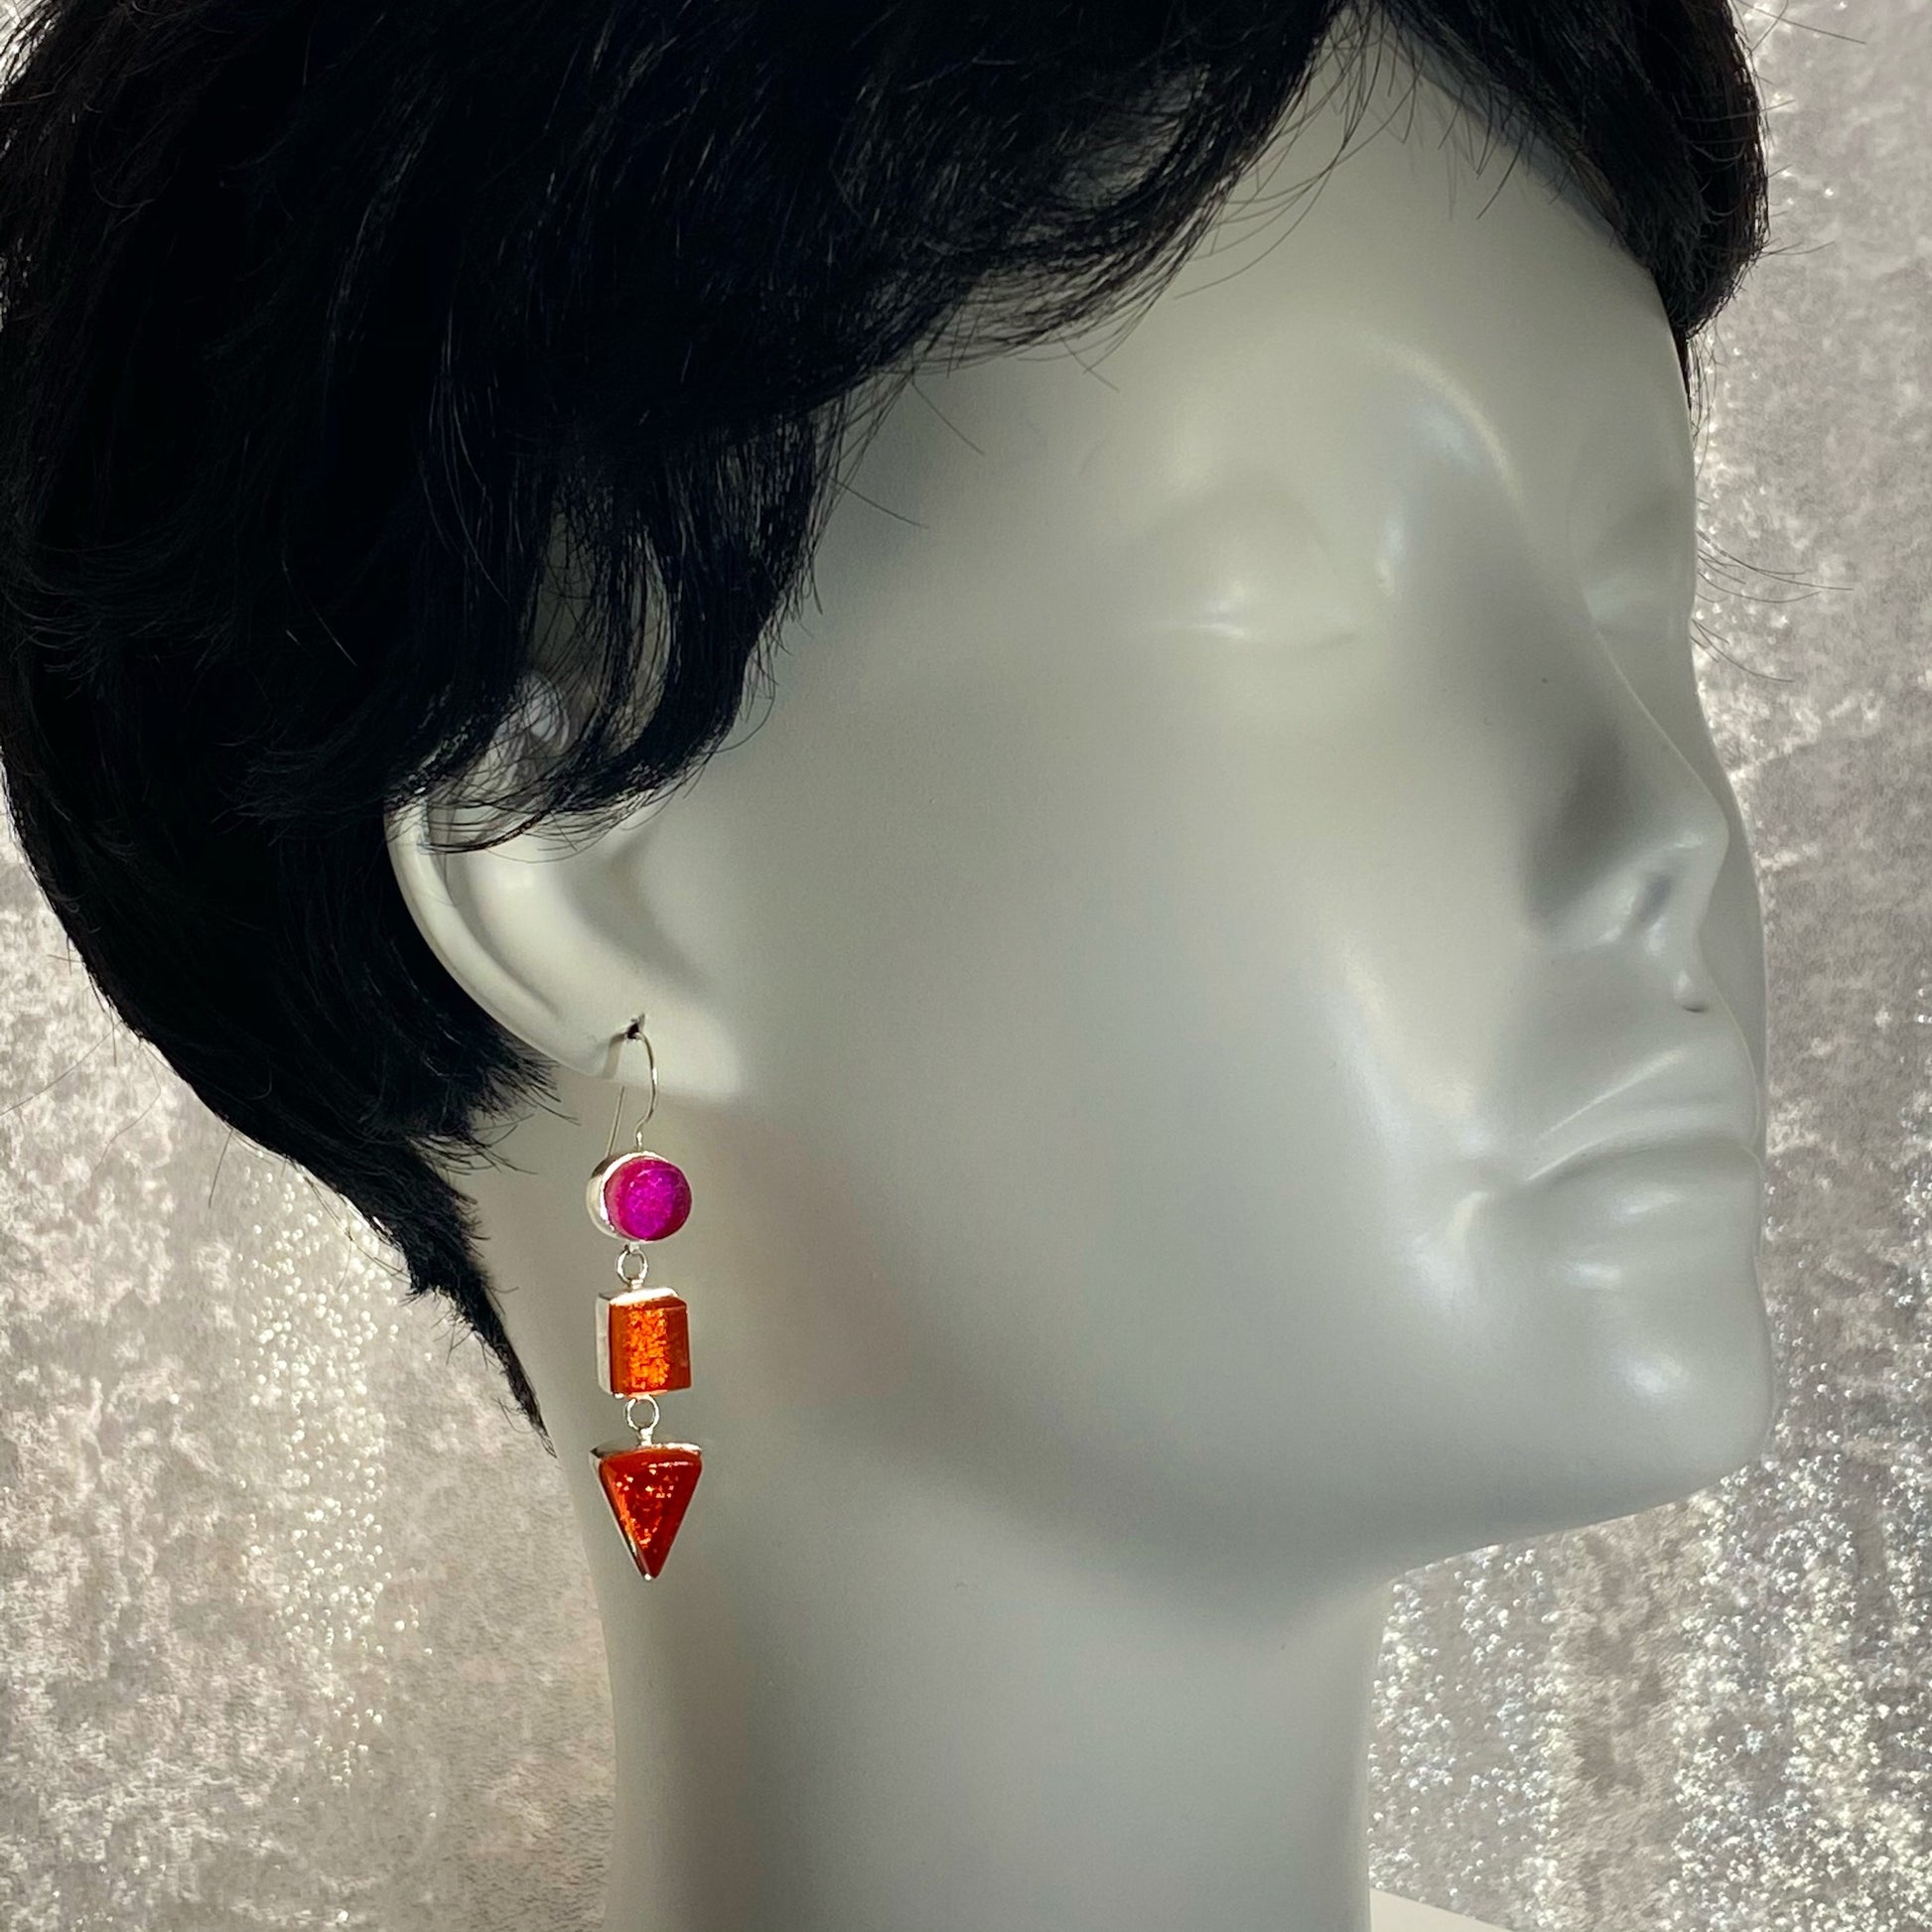 pink, orange, triple drop earrings, fused glass, glass jewelry, glass and silver jewelry, handmade, handcrafted, American Craft, hand fabricated jewelry, hand fabricated jewellery, Athen, Georgia, colorful jewelry, sparkle, bullseye glass, dichroic glass, art jewelry